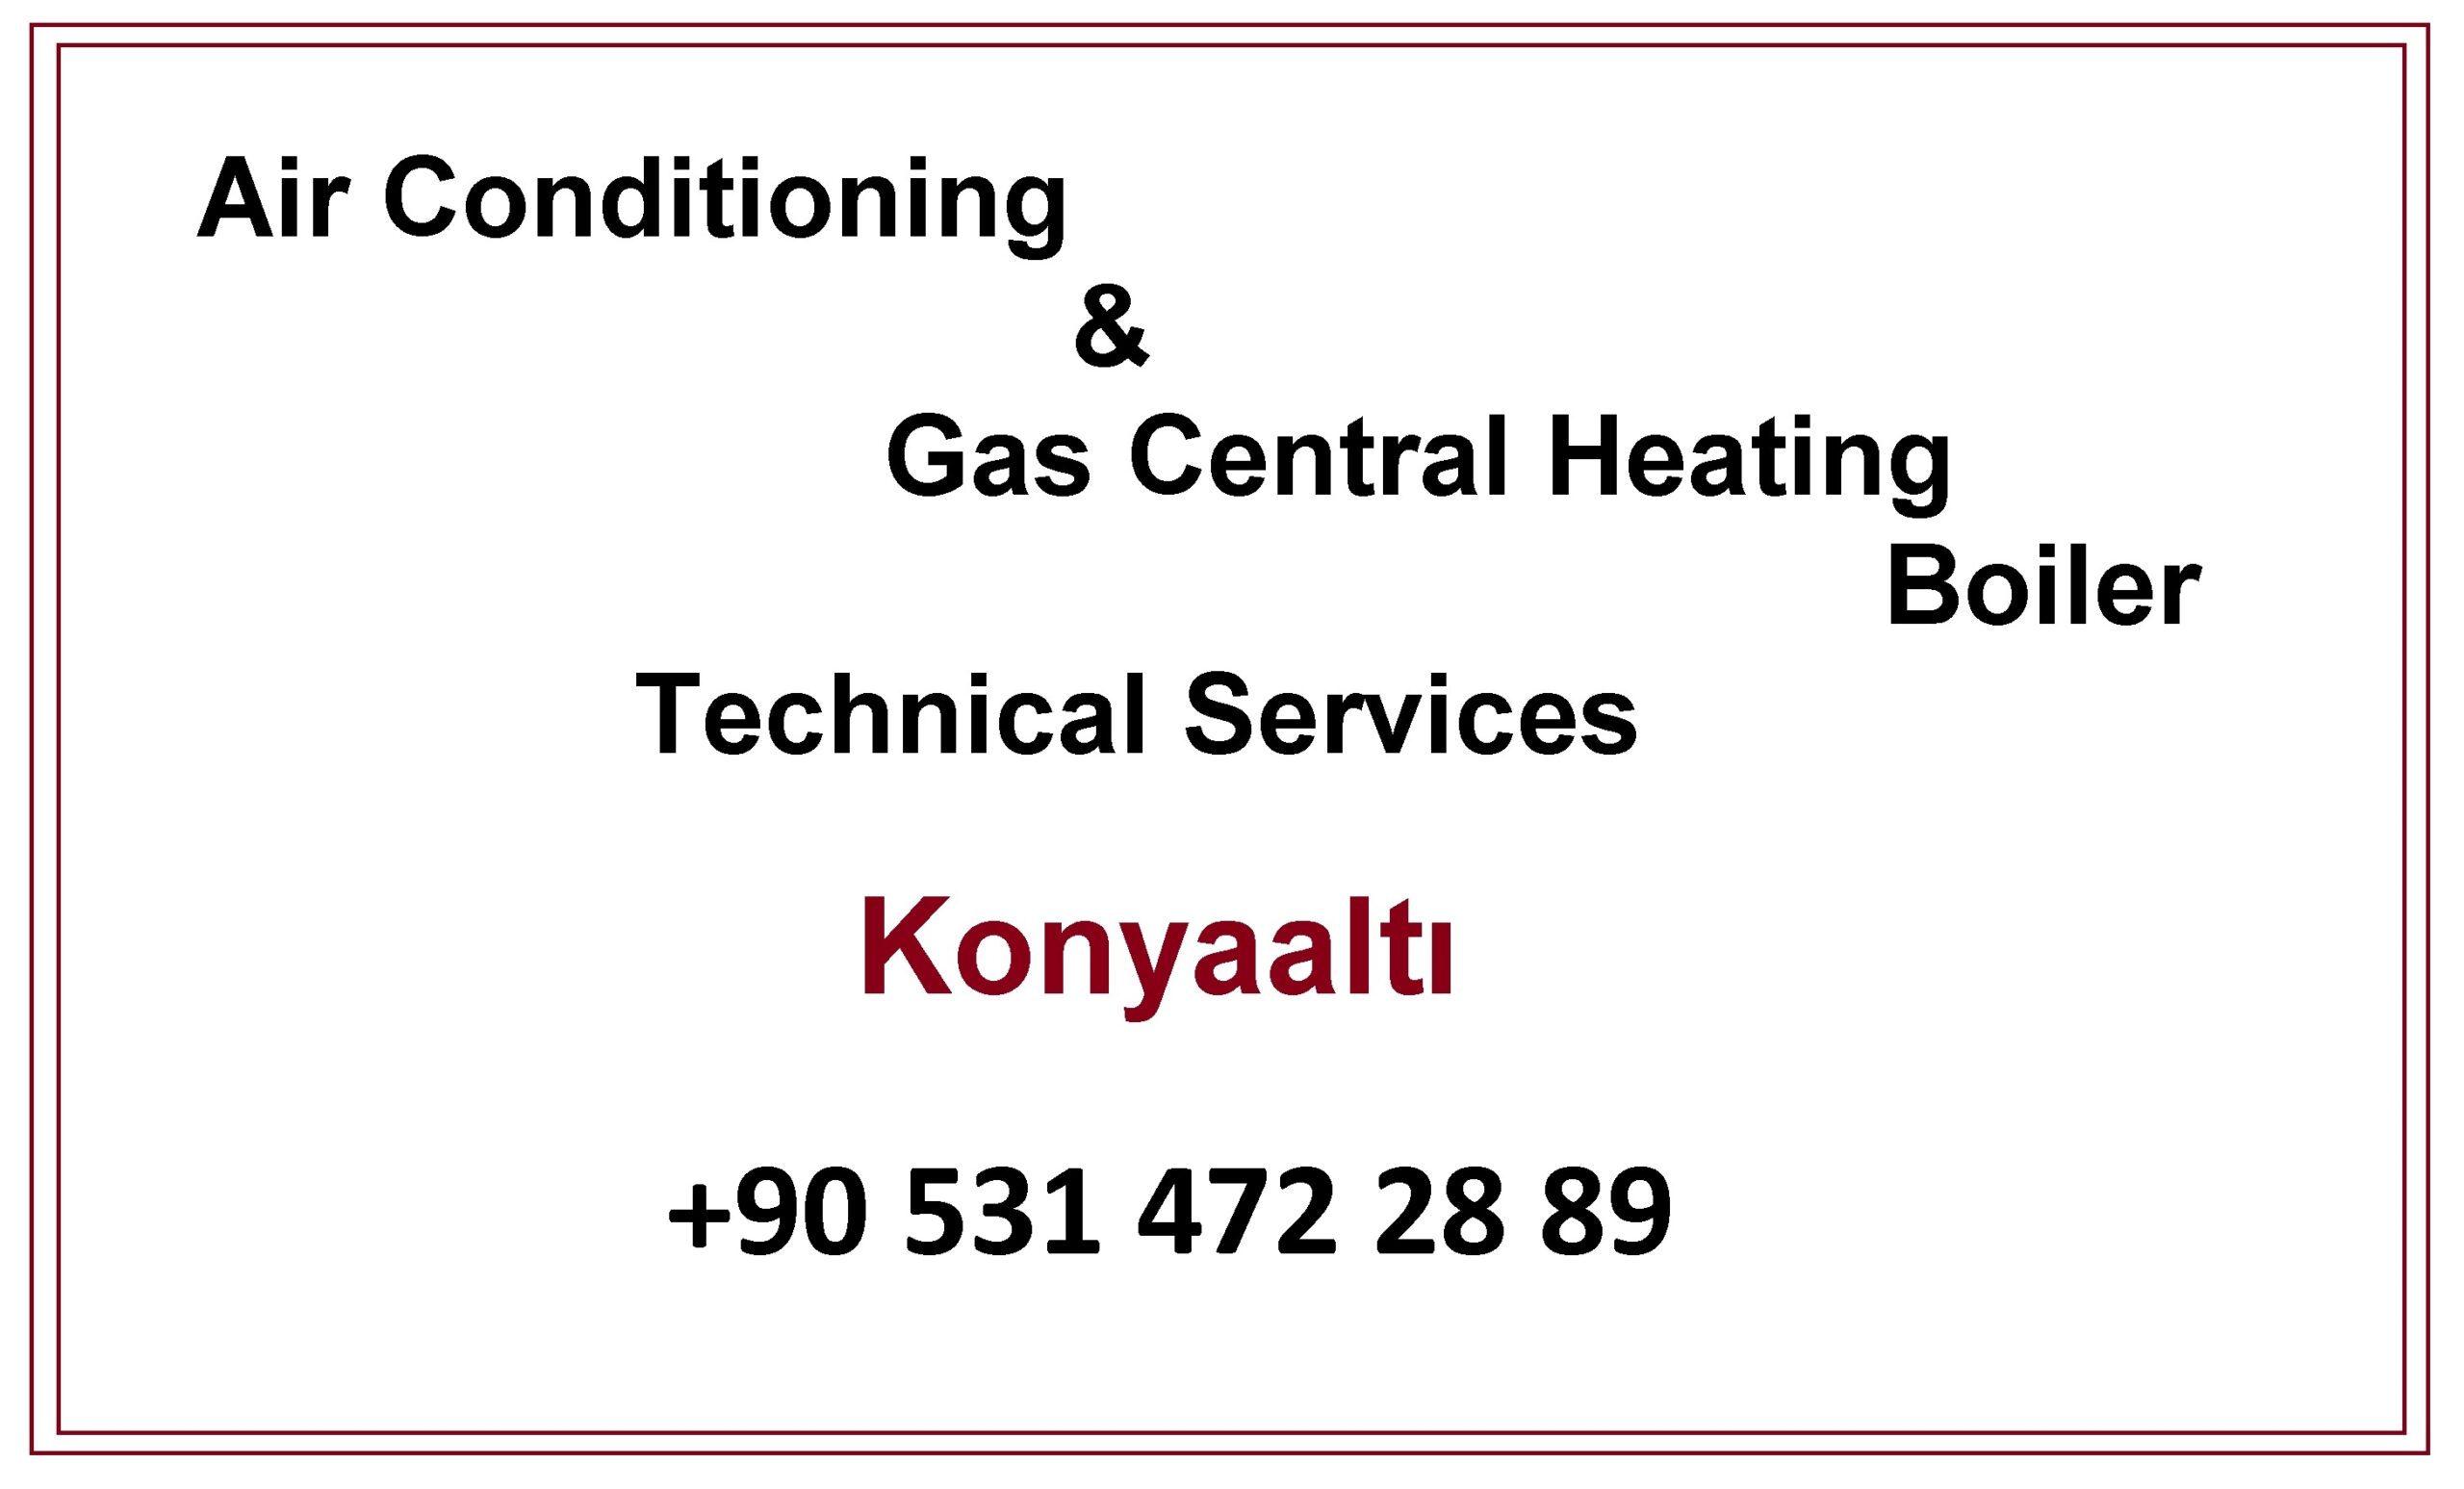 Air Conditioning, Gas Central Heating TS in Konyaalti